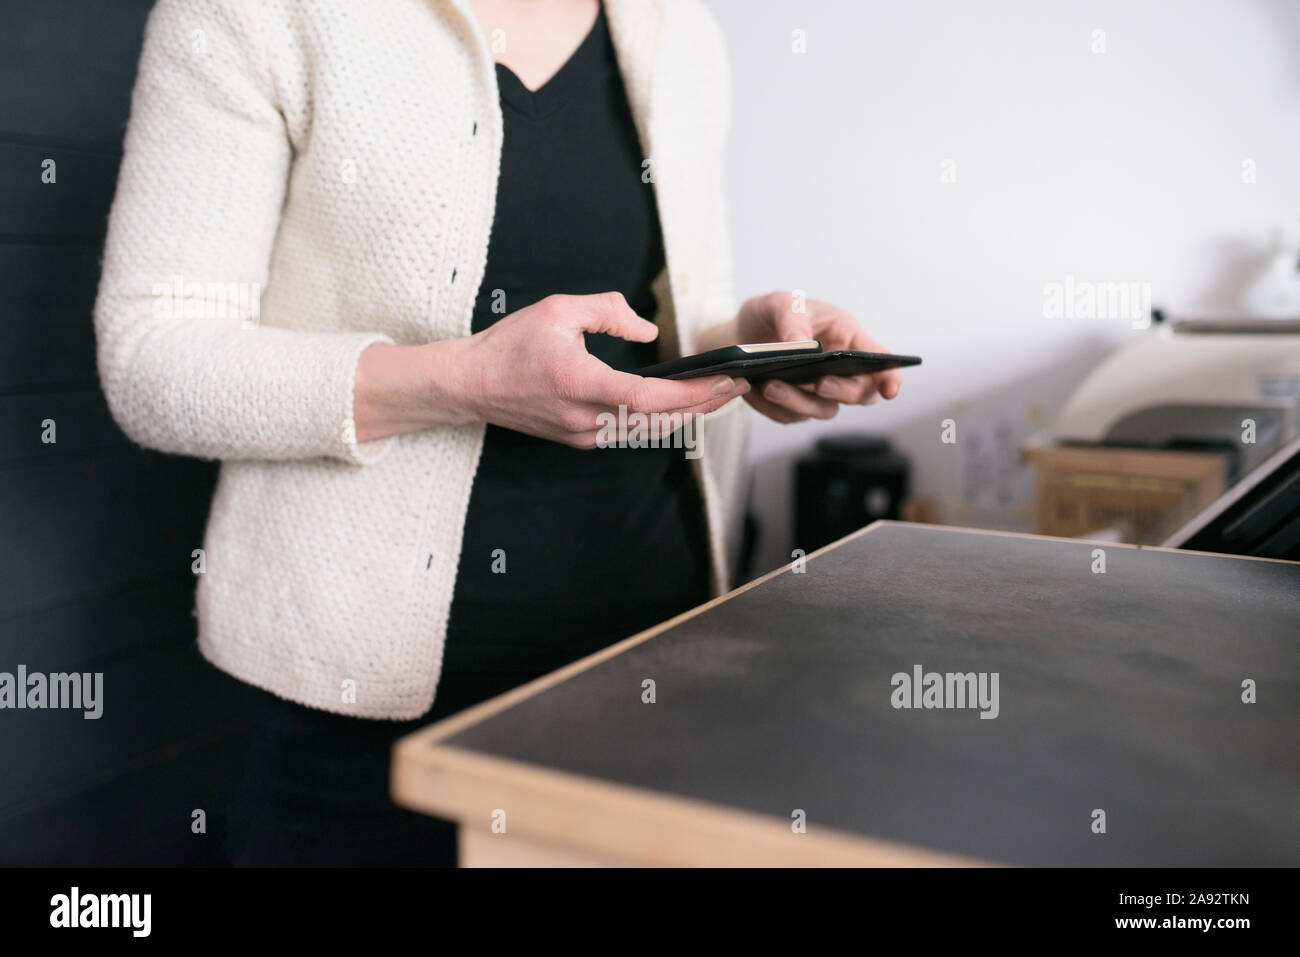 Woman using cell phone Stock Photo